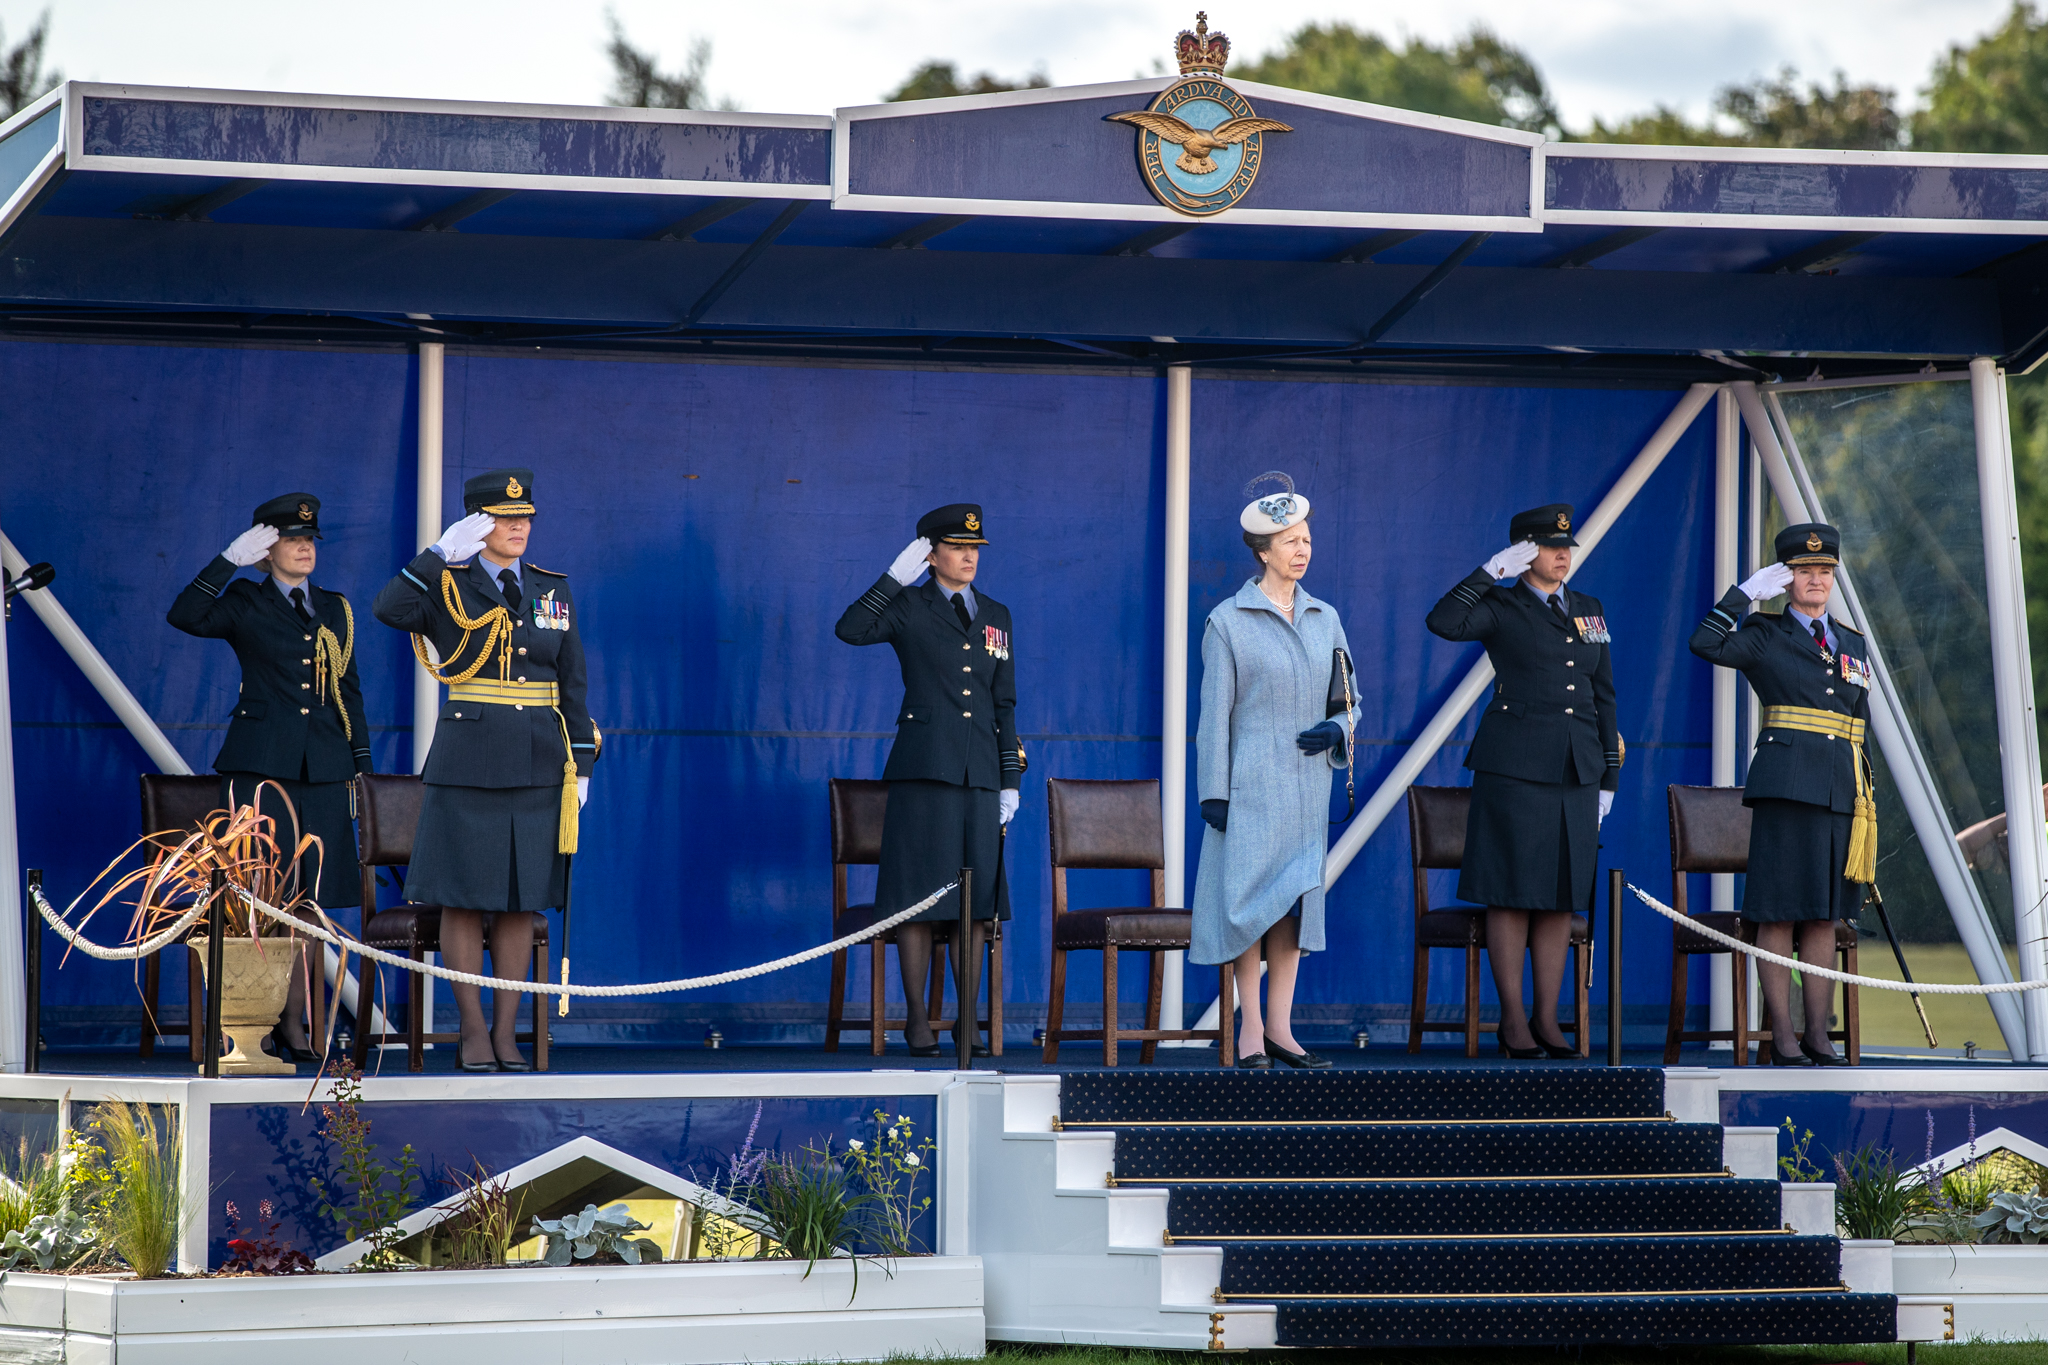 Her Royal Highness stands on parade stage with personnel.